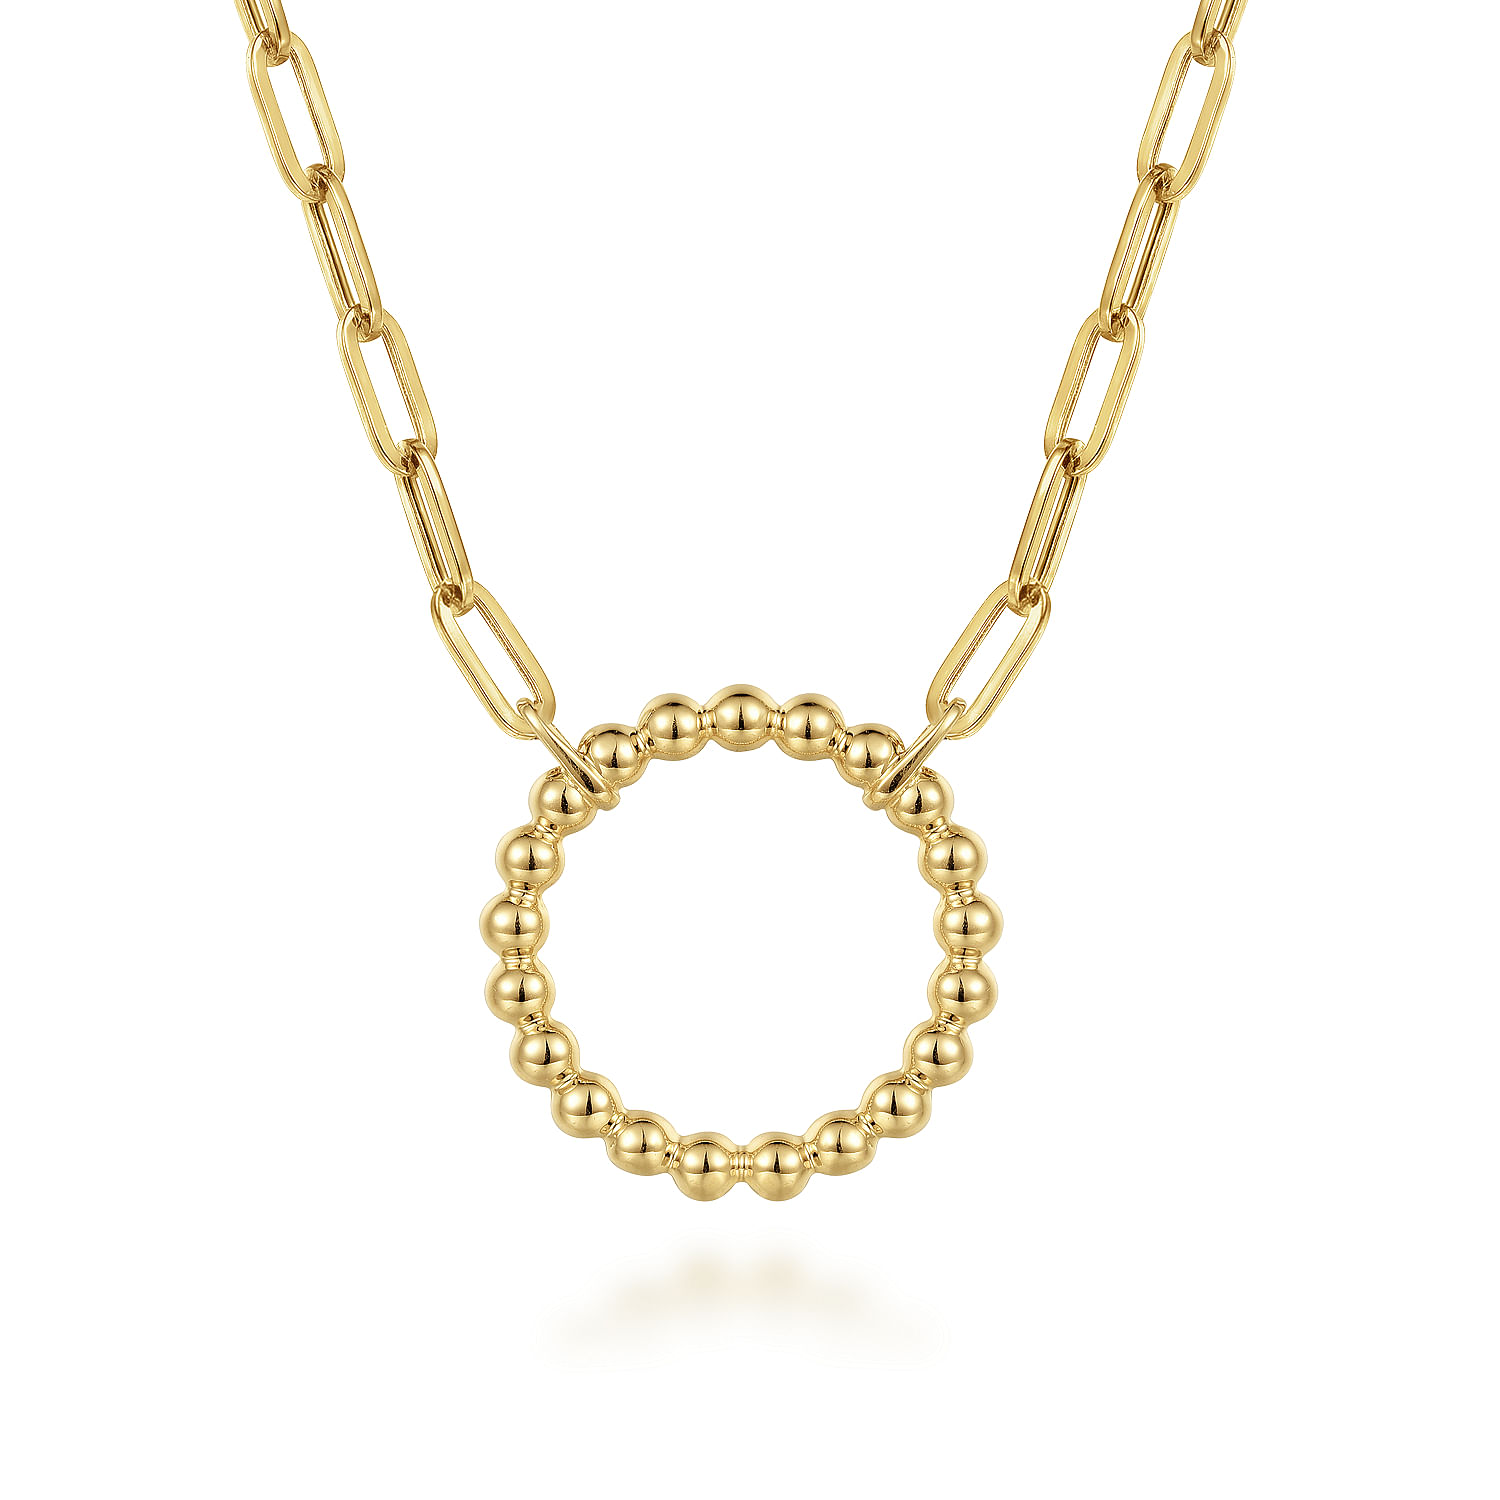 Tiffany HardWear Graduated Link Necklace in White Gold with Pavé